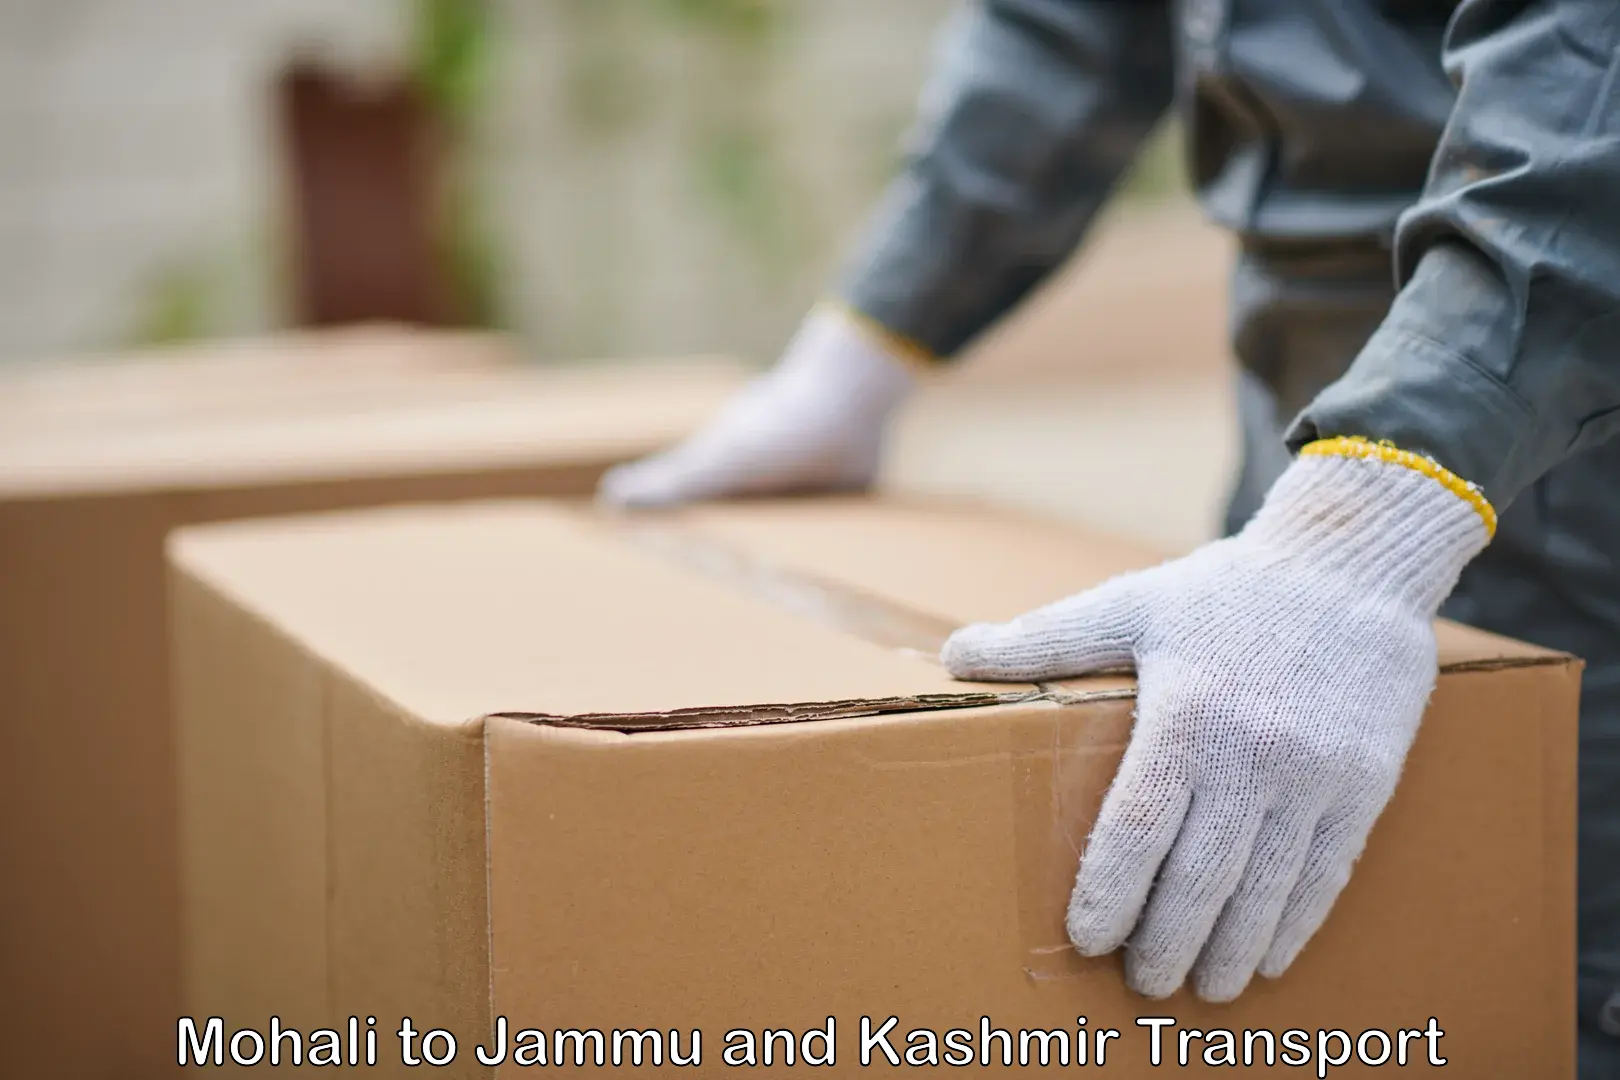 Cargo train transport services Mohali to Pulwama